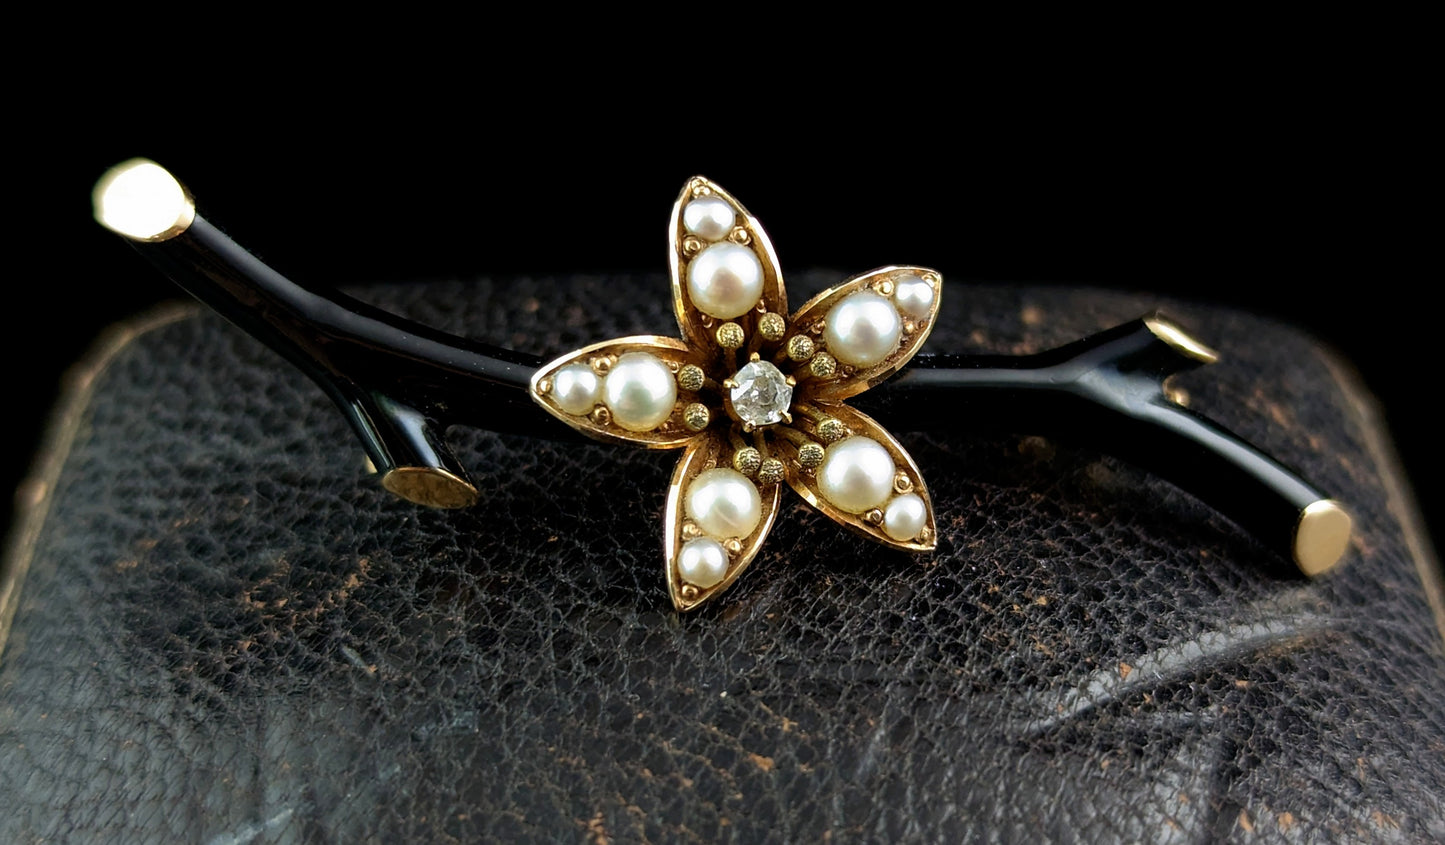 Antique mourning brooch, Diamond and pearl flower, black enamel, 15ct gold